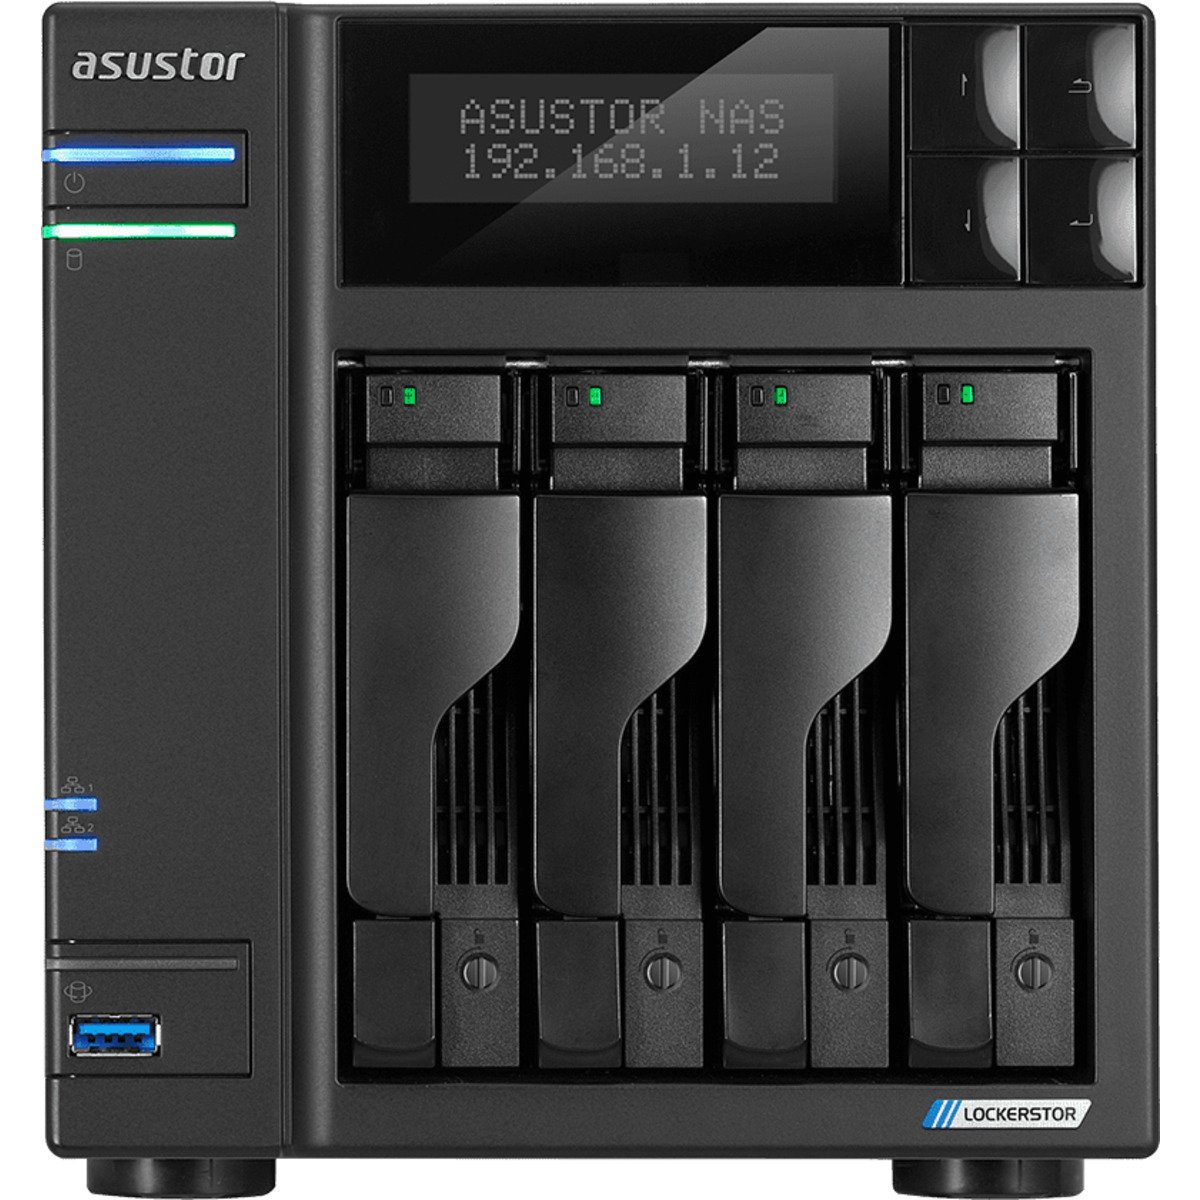 ASUSTOR AS6604T Lockerstor 4 Desktop 4-Bay Multimedia / Power User / Business NAS - Network Attached Storage Device Burn-In Tested Configurations - FREE RAM UPGRADE AS6604T Lockerstor 4